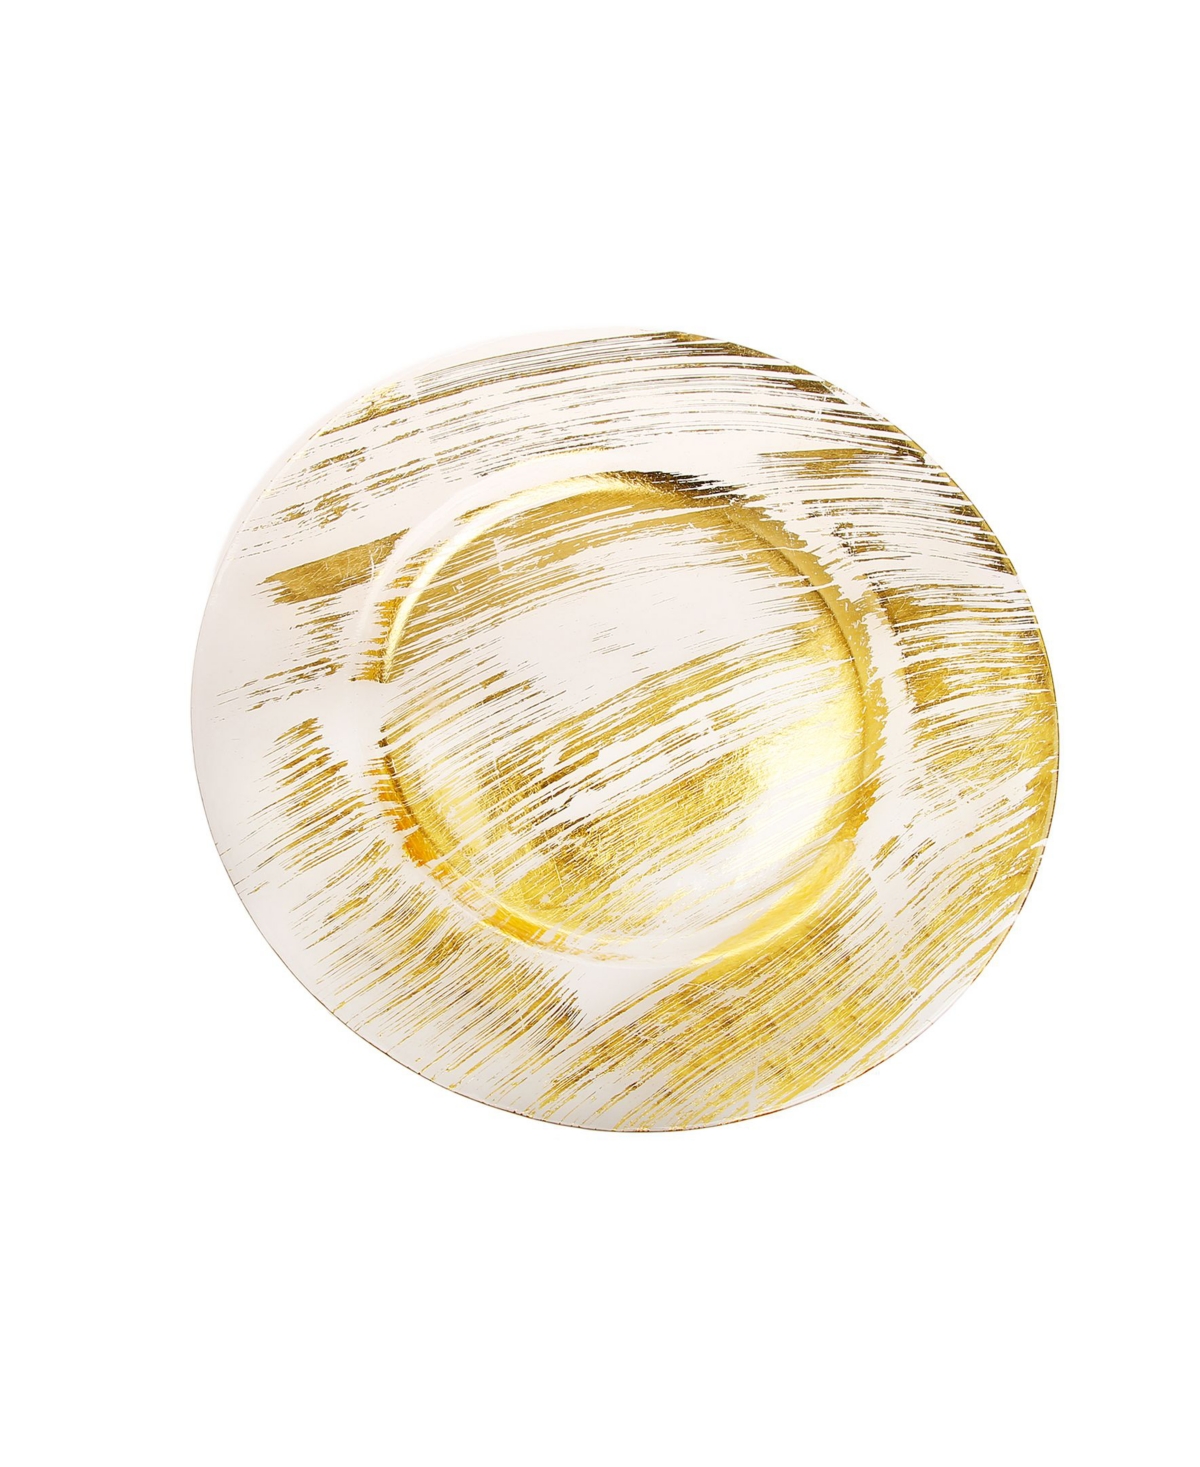 Brushed Glass Charger Plates, Set of 4 - Gold-Tone, Clear